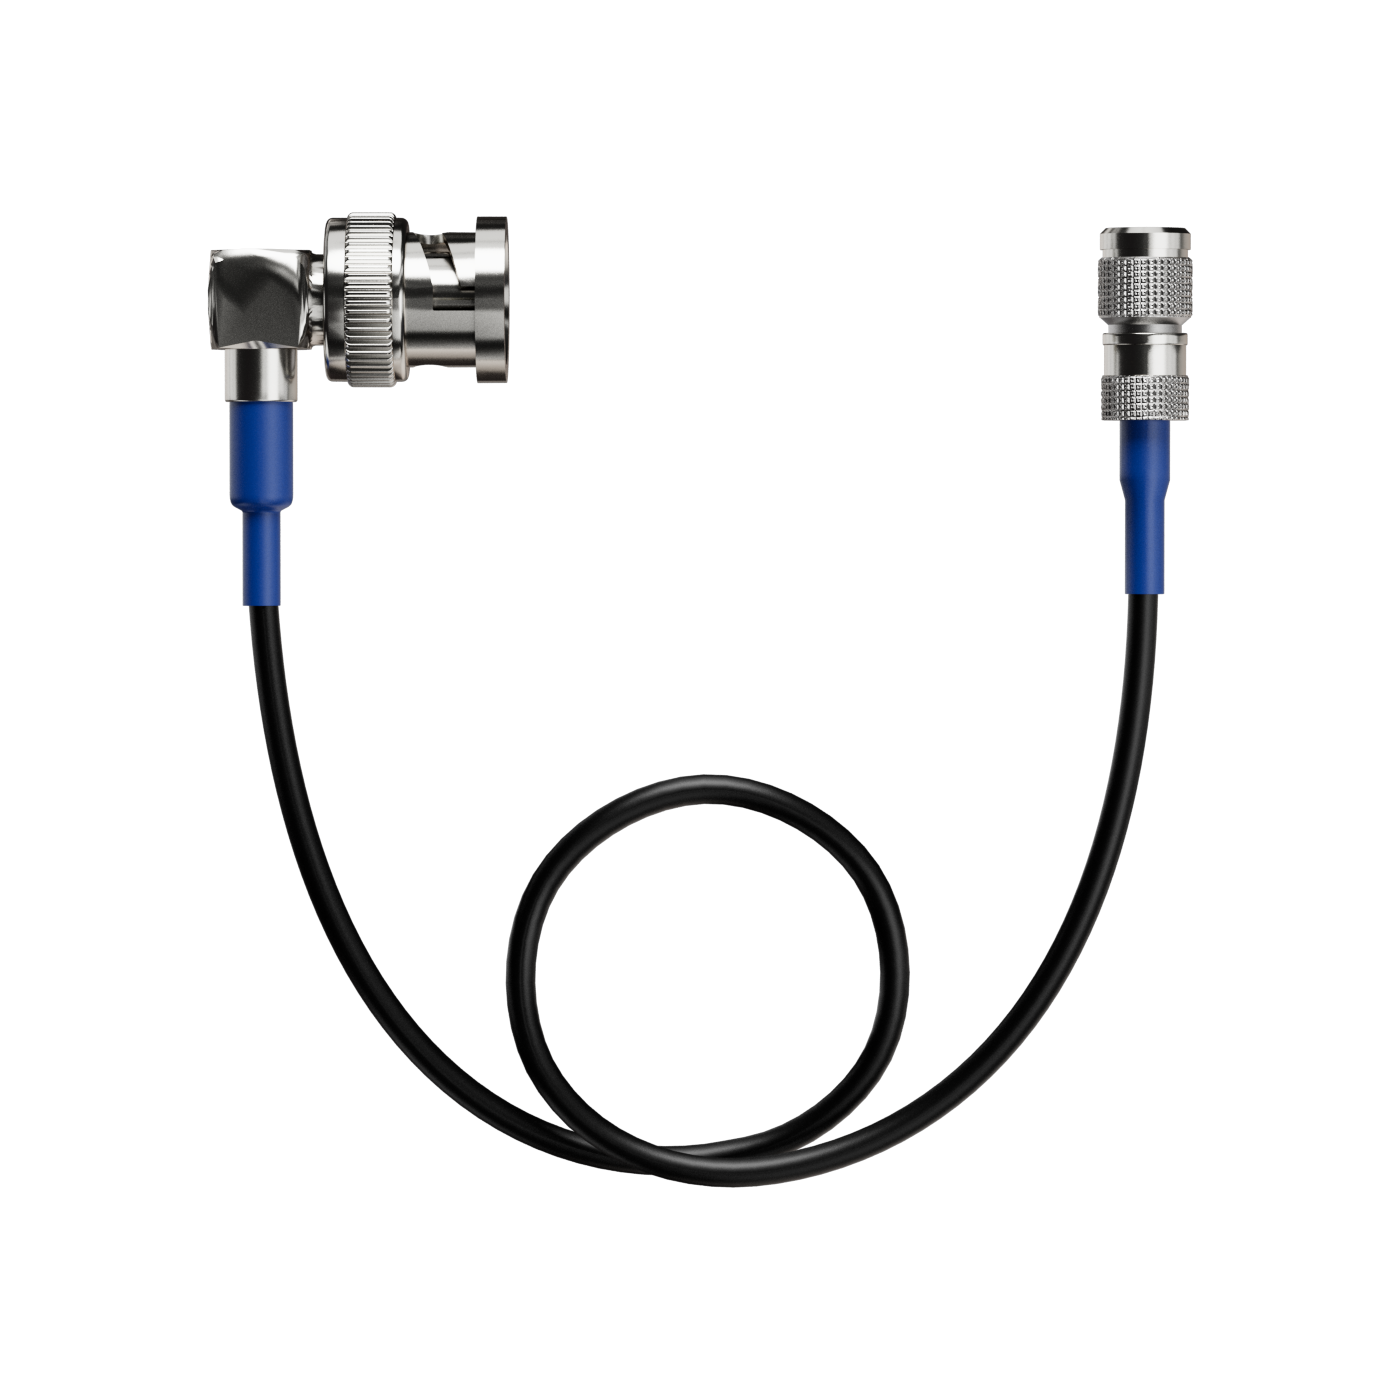 UltraSync One to BNC timecode & genlock cable (blue)